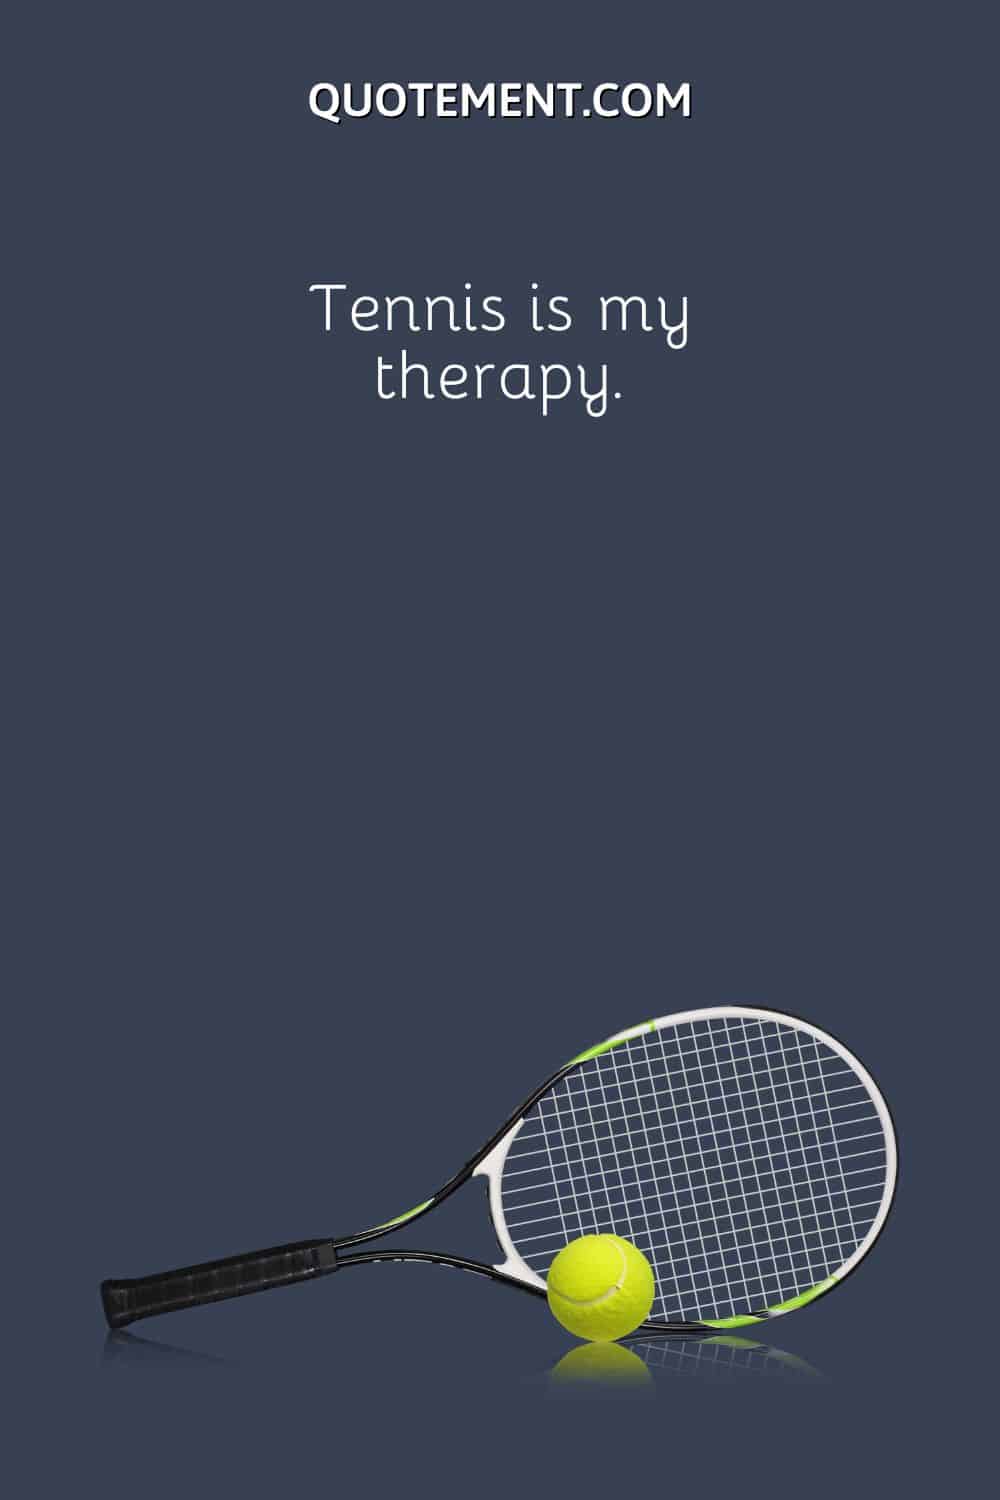 Tennis is my therapy.